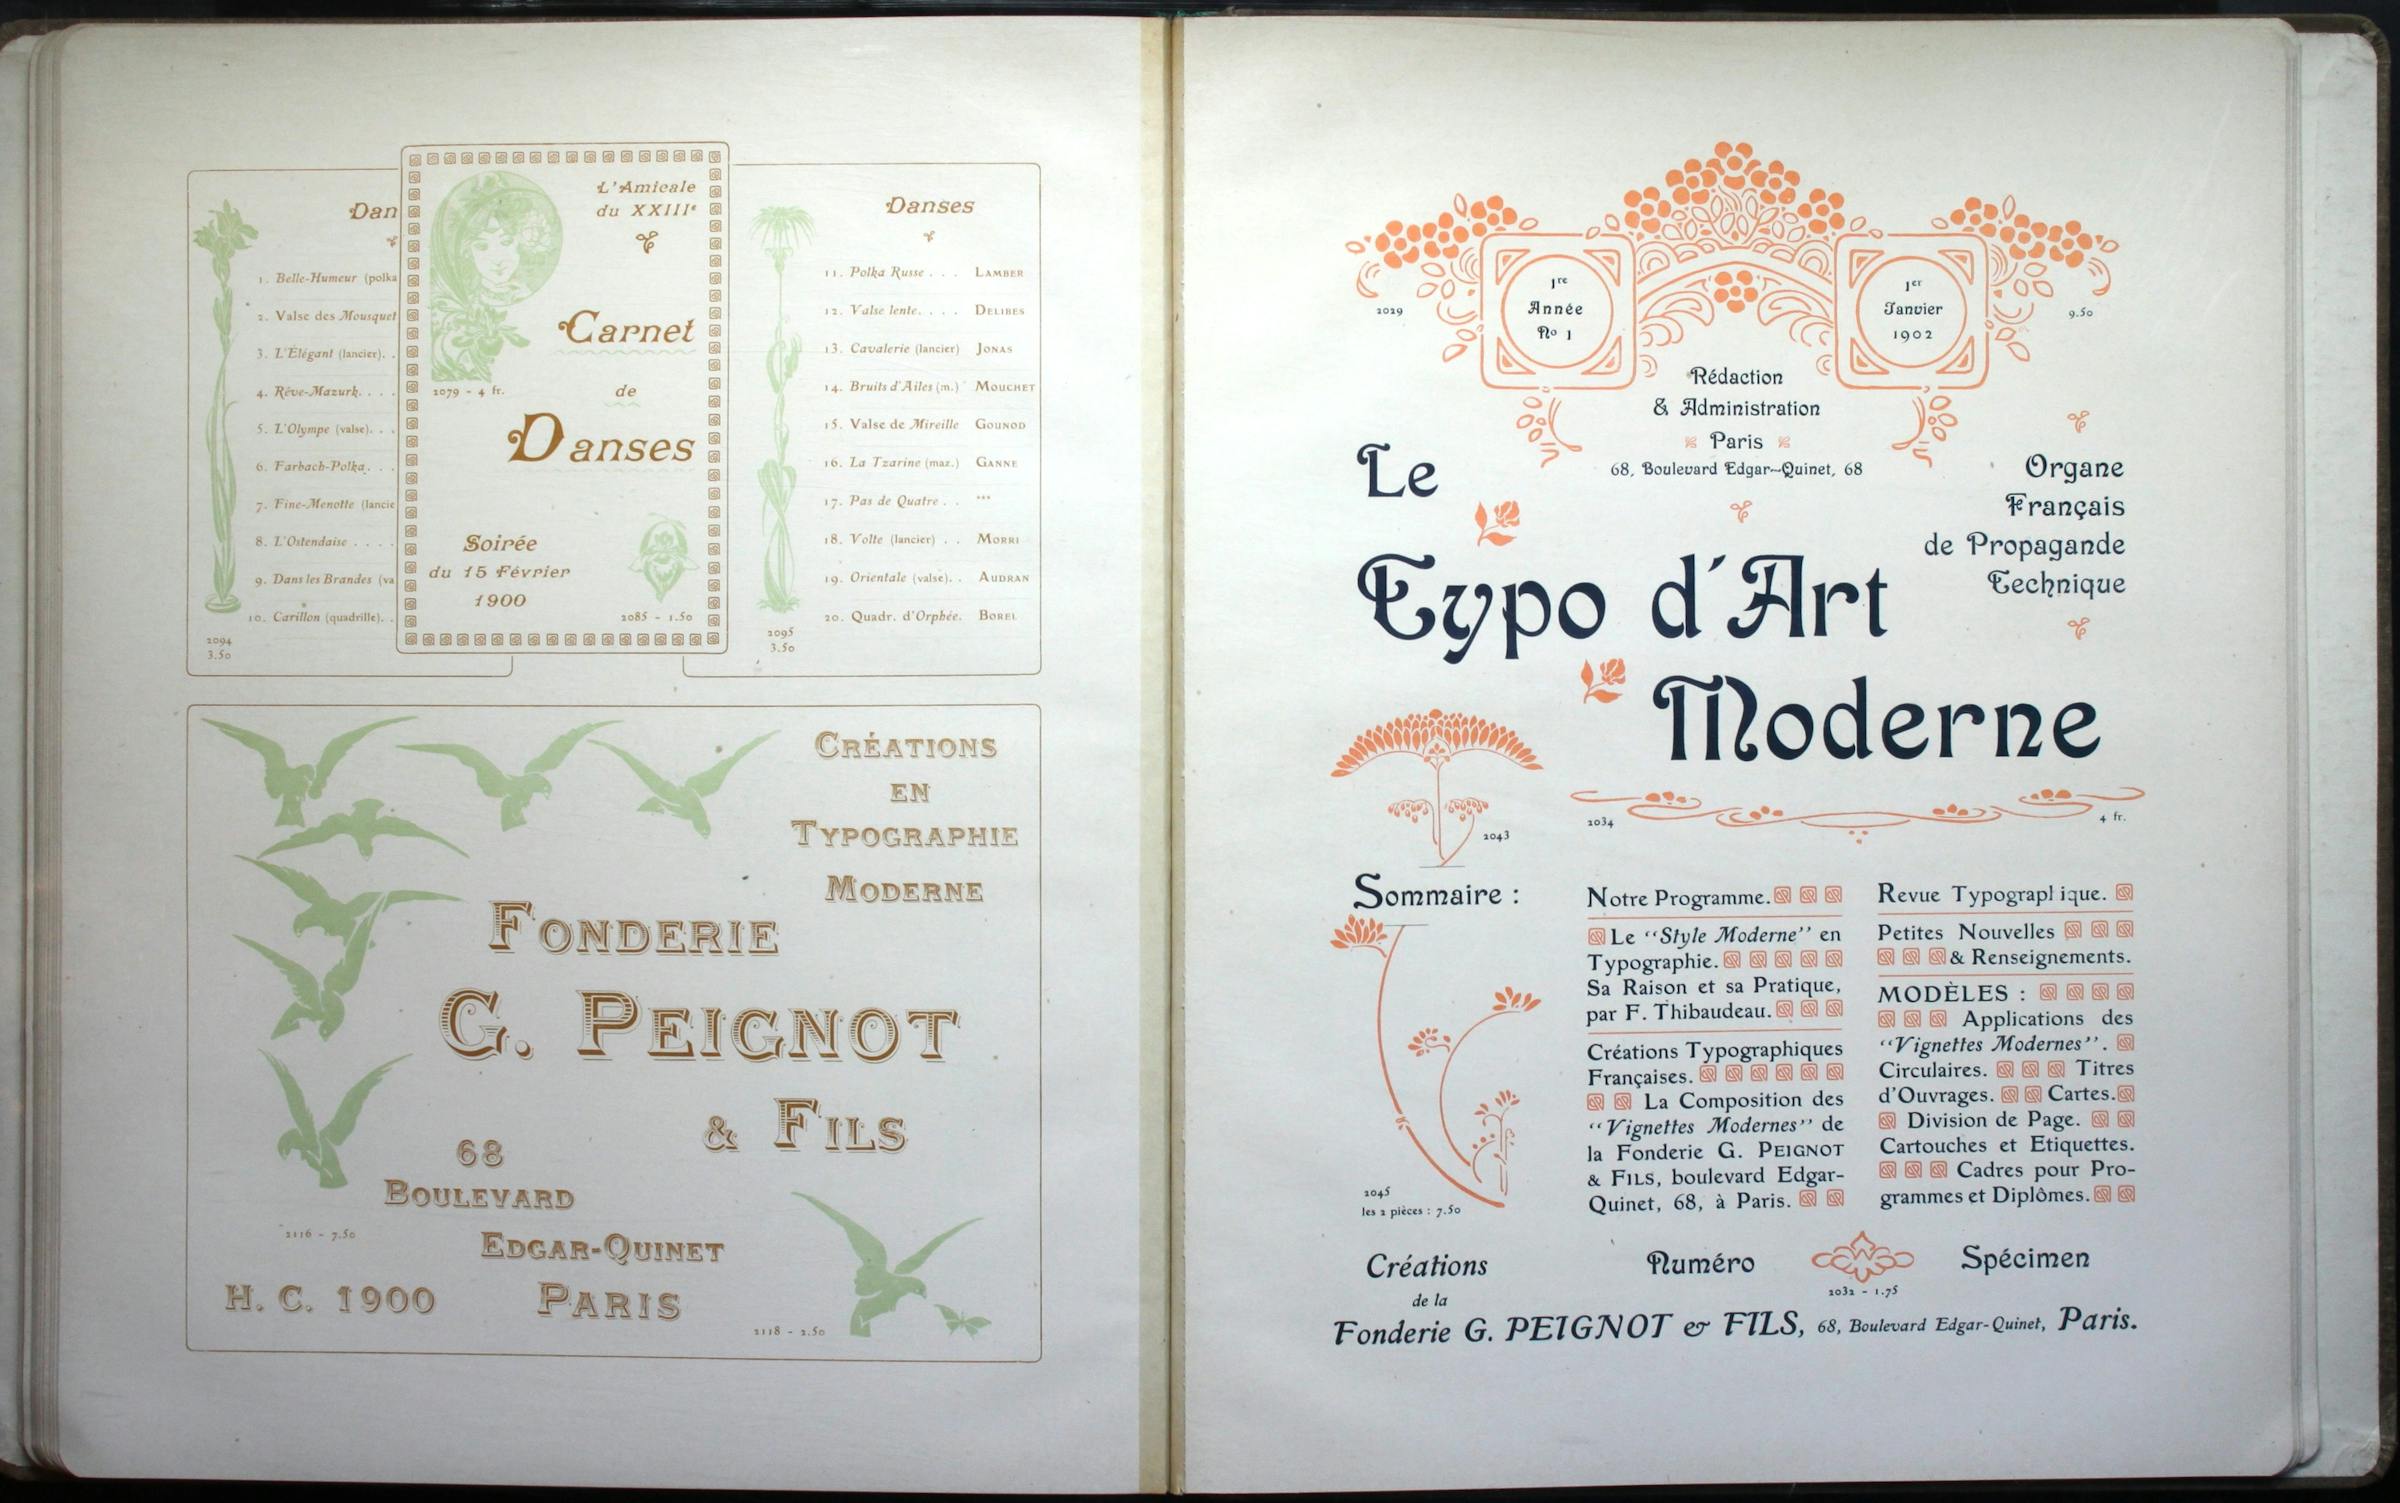 Francis Thibaudeau and the art nouveau movement in typography: innovations and impacts in early 20th century French printing